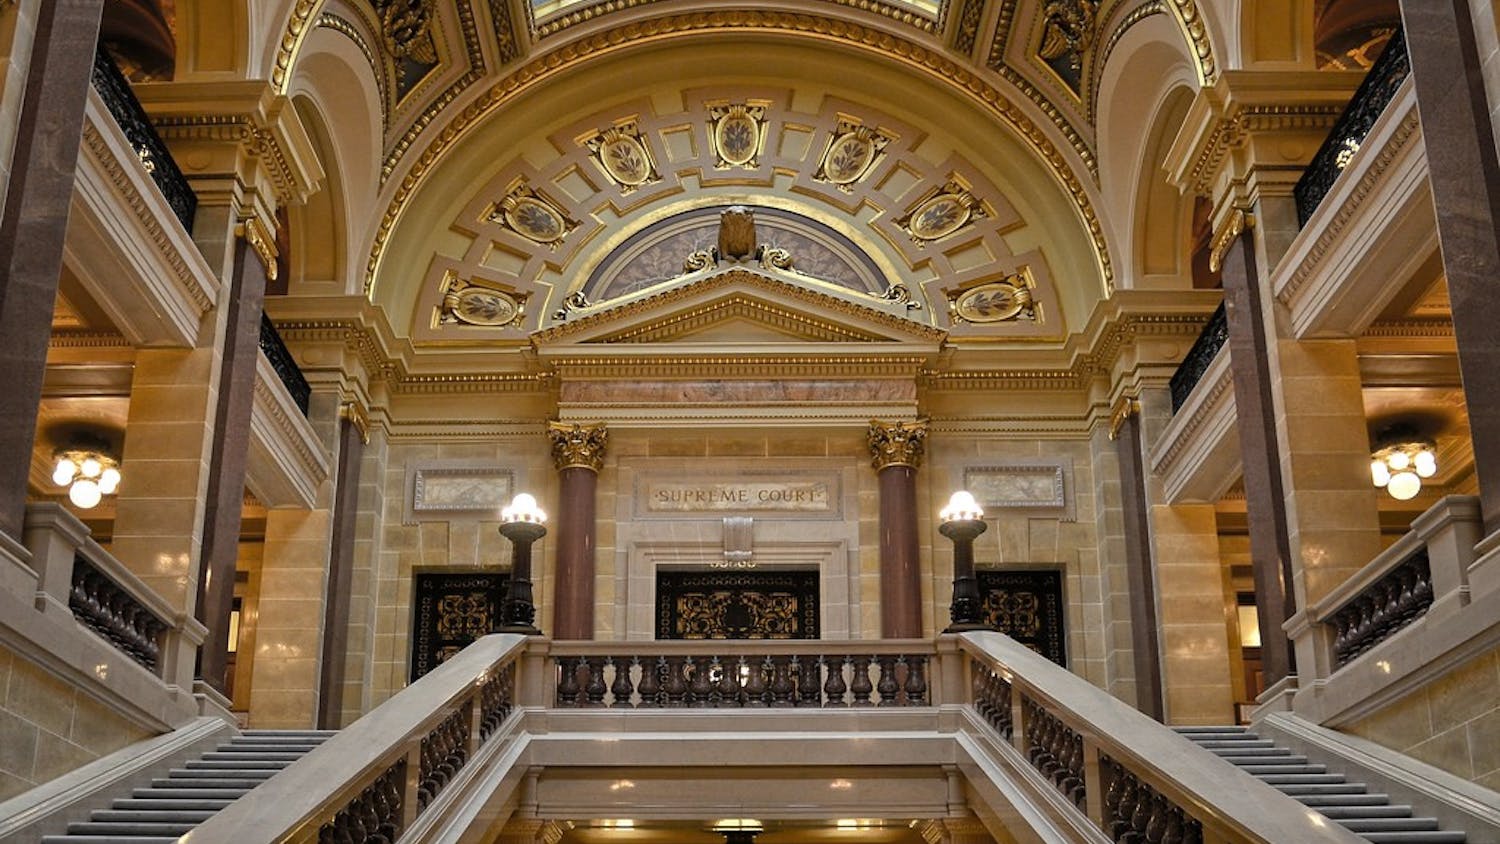 Entrance to the Wisconsin Supreme Court 11-11-2013 008